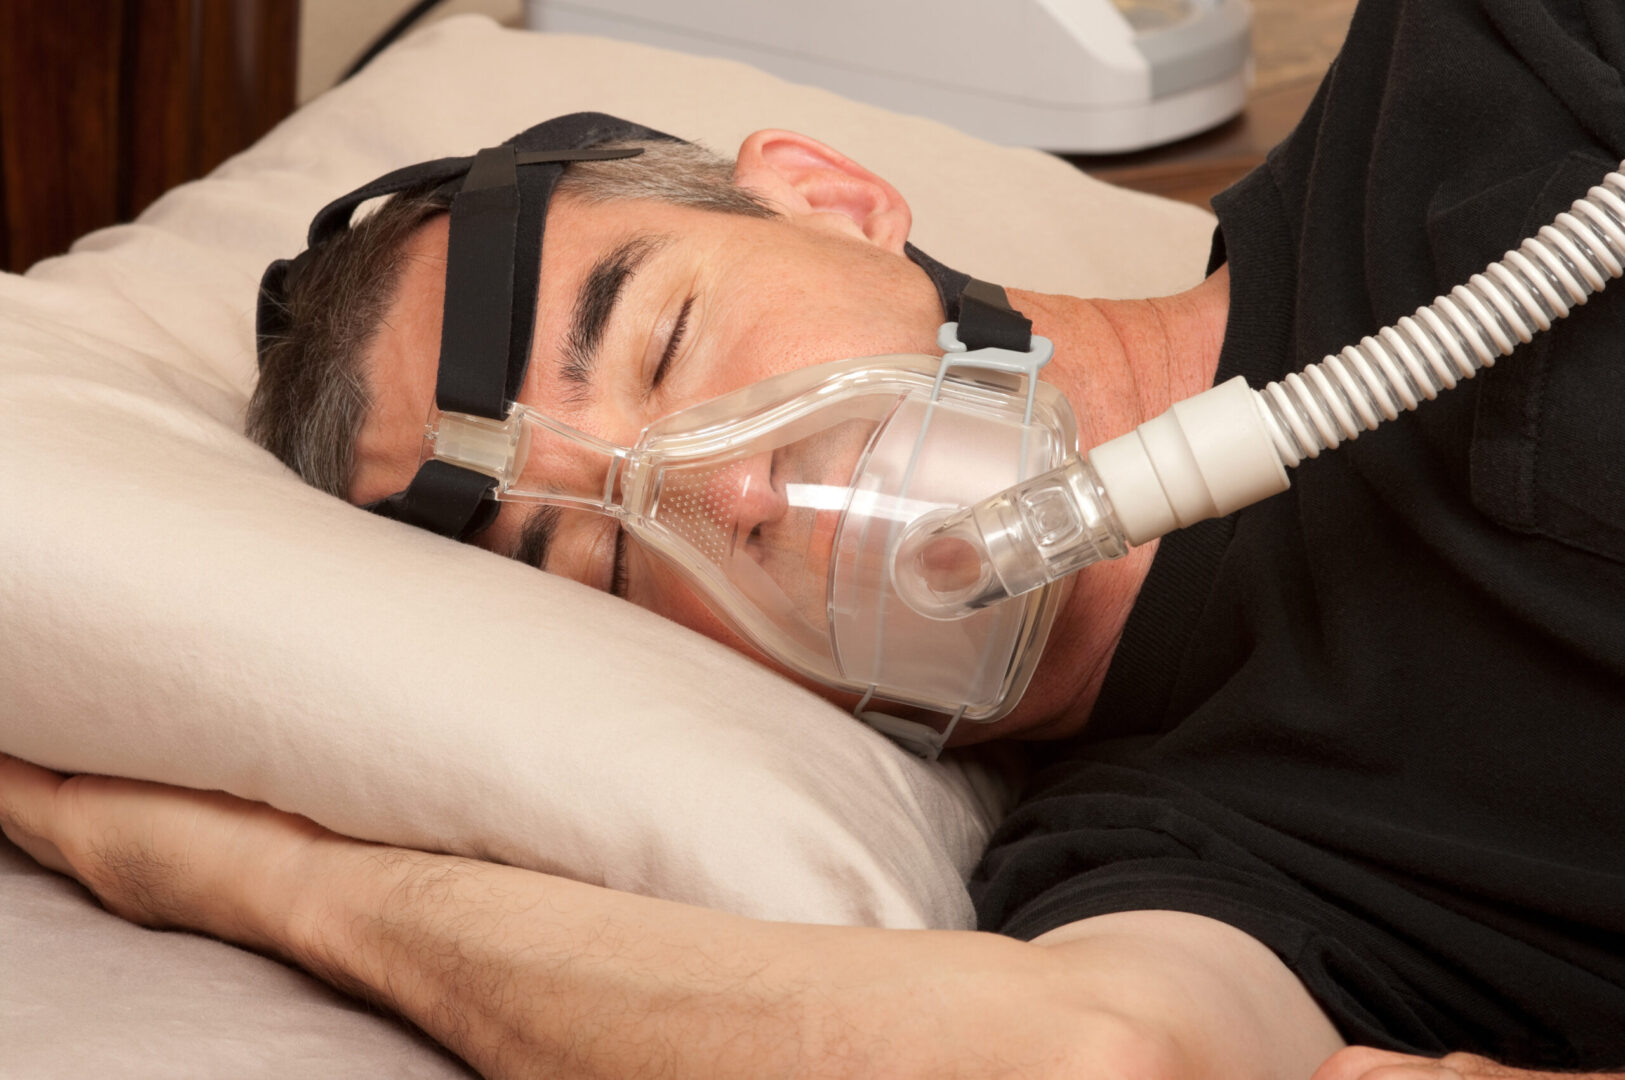 Sleep Apnea and CPAP services provided by Aspire Surgical in Salt Lake City, UT